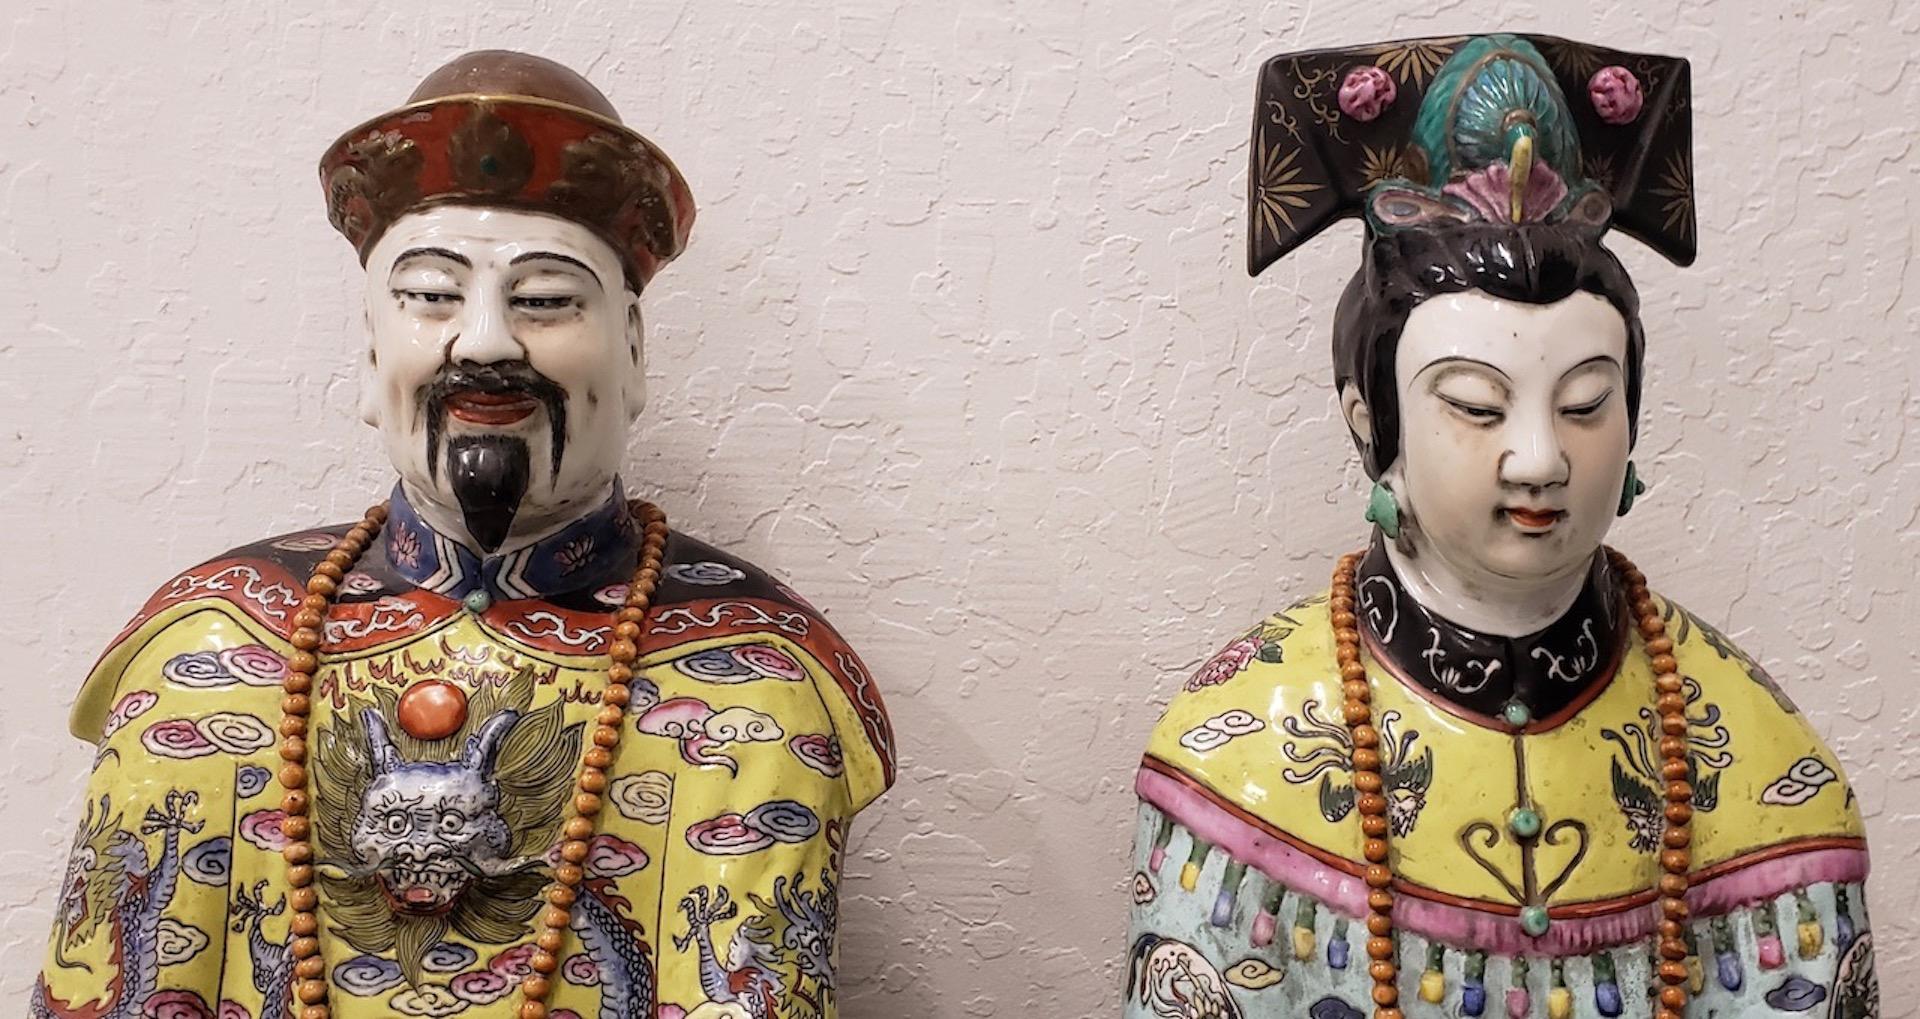 Chinese emperor & empress large scale porcelain figures early to mid-20th century

A fantastic pair of high quality hand painted porcelain figures of a Chinese Emperor and Empress.

Great care and consideration were put into every detail of